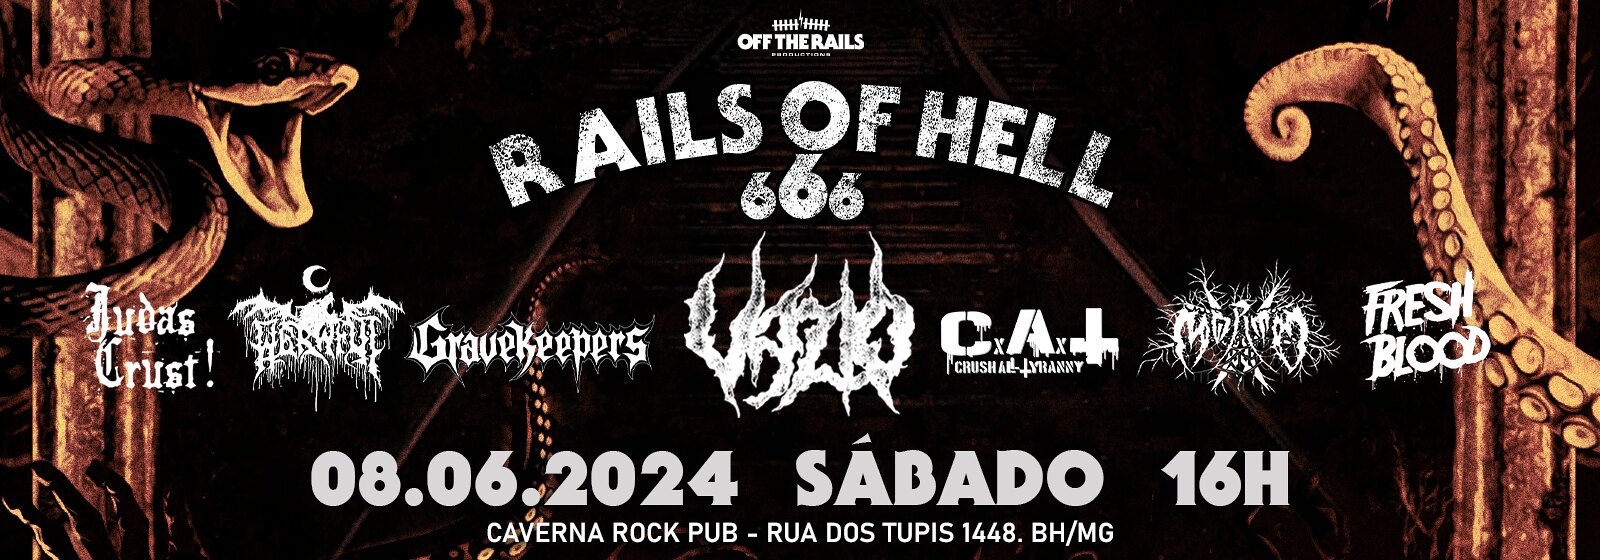 Rails OF Hell 666